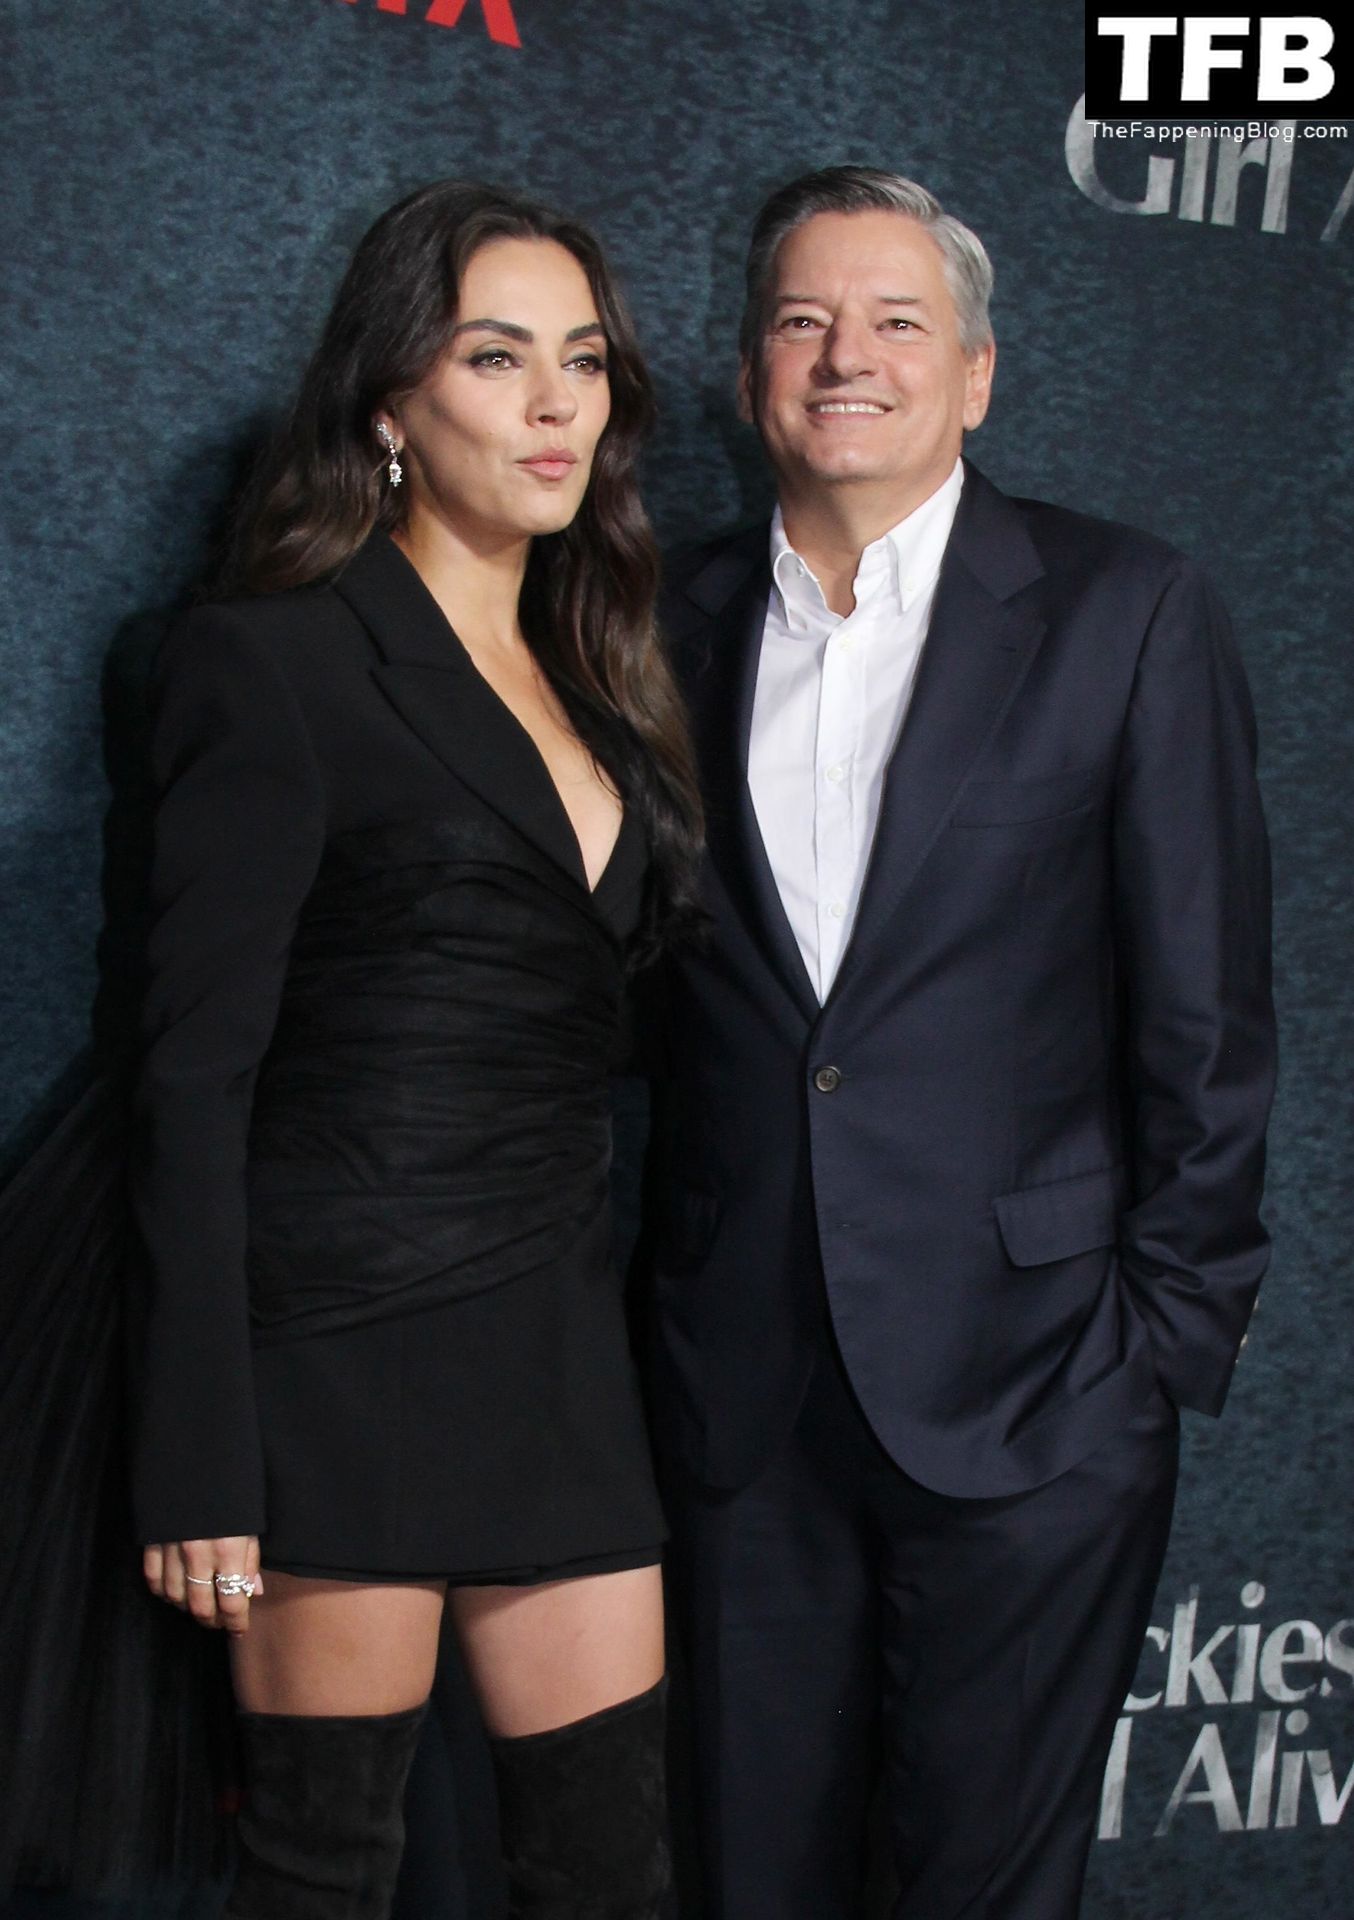 Mila Kunis Poses on the Red Carpet at the New York Premiere of Netflix’s ‘Luckiest Girl Alive’ (92 Photos)